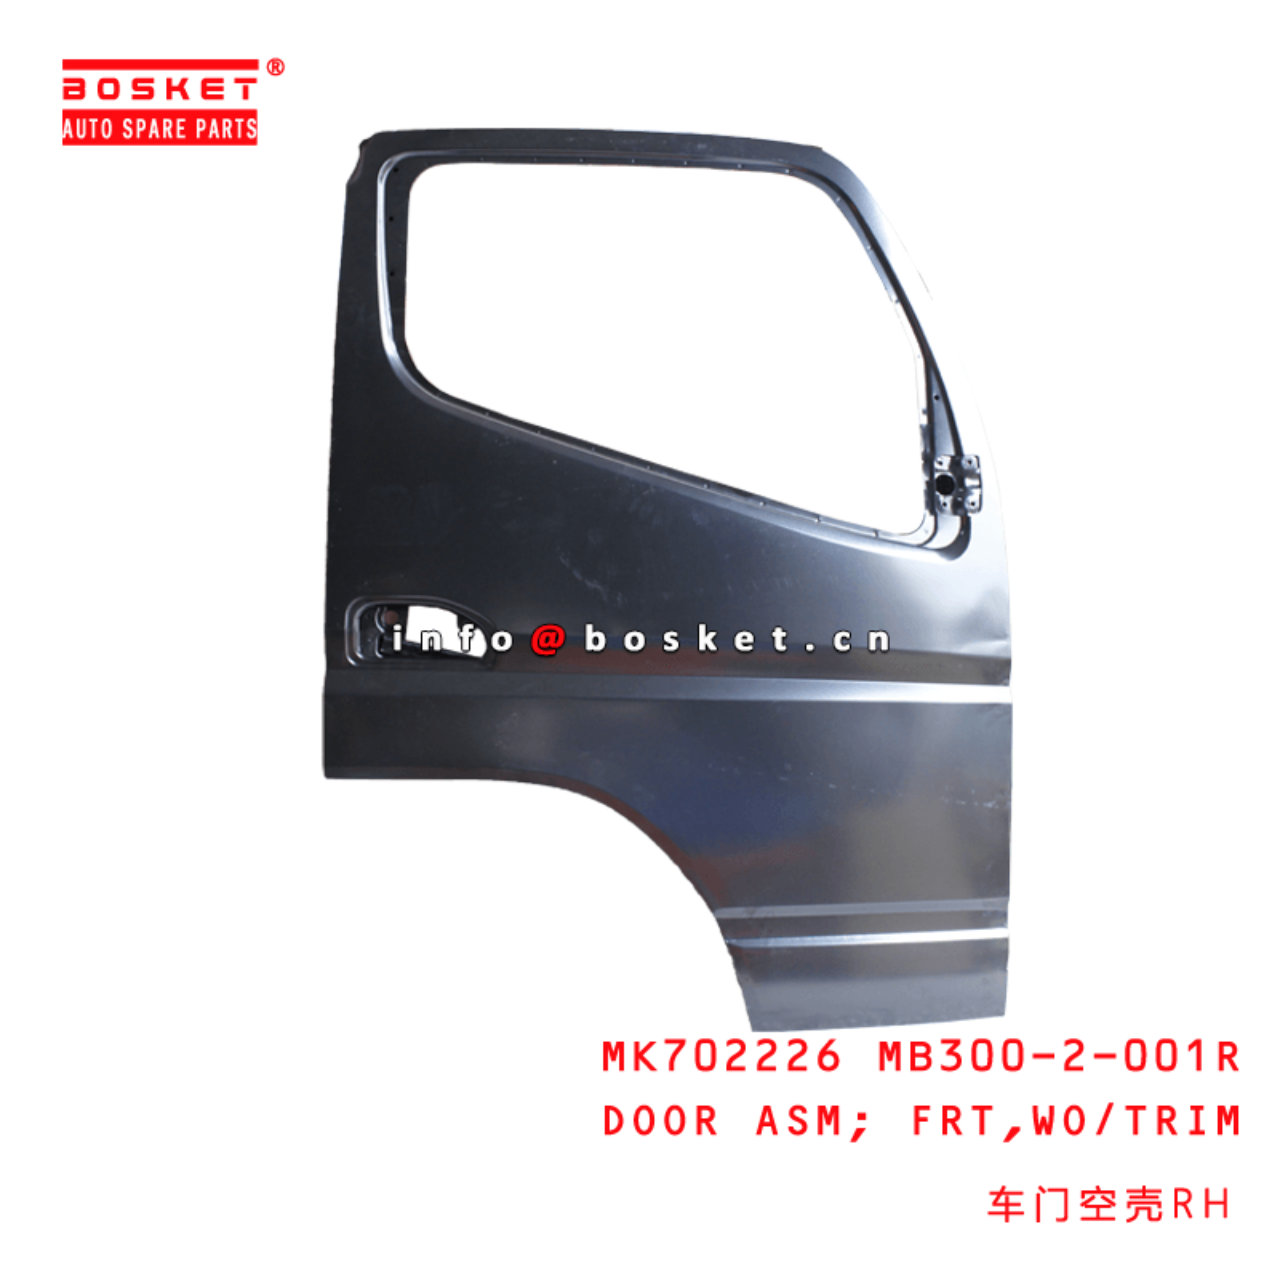  MK702226 MB300-2-001R Without Trim Front Door Assembly Suitable For MITSUBISHI FUSO CANTER RUS